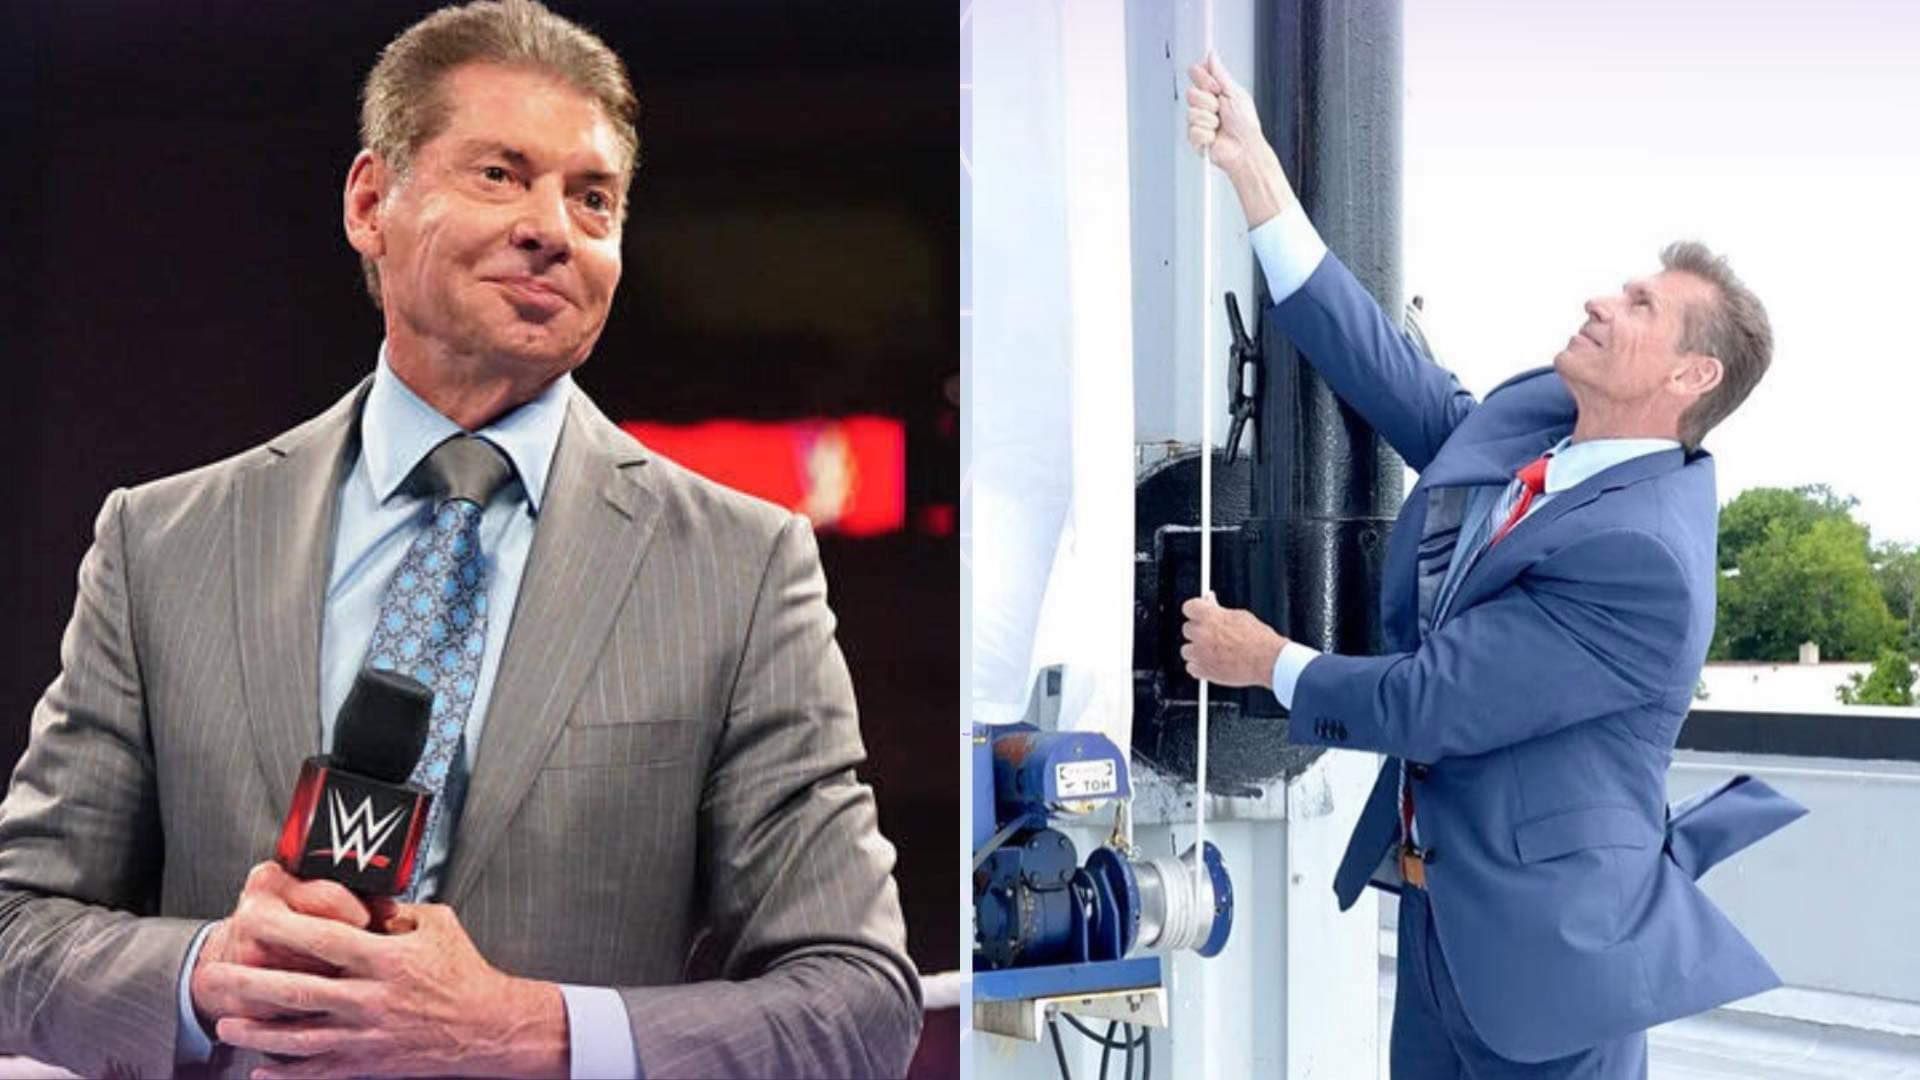 The former WWE Chairman is no longer associated withthe company